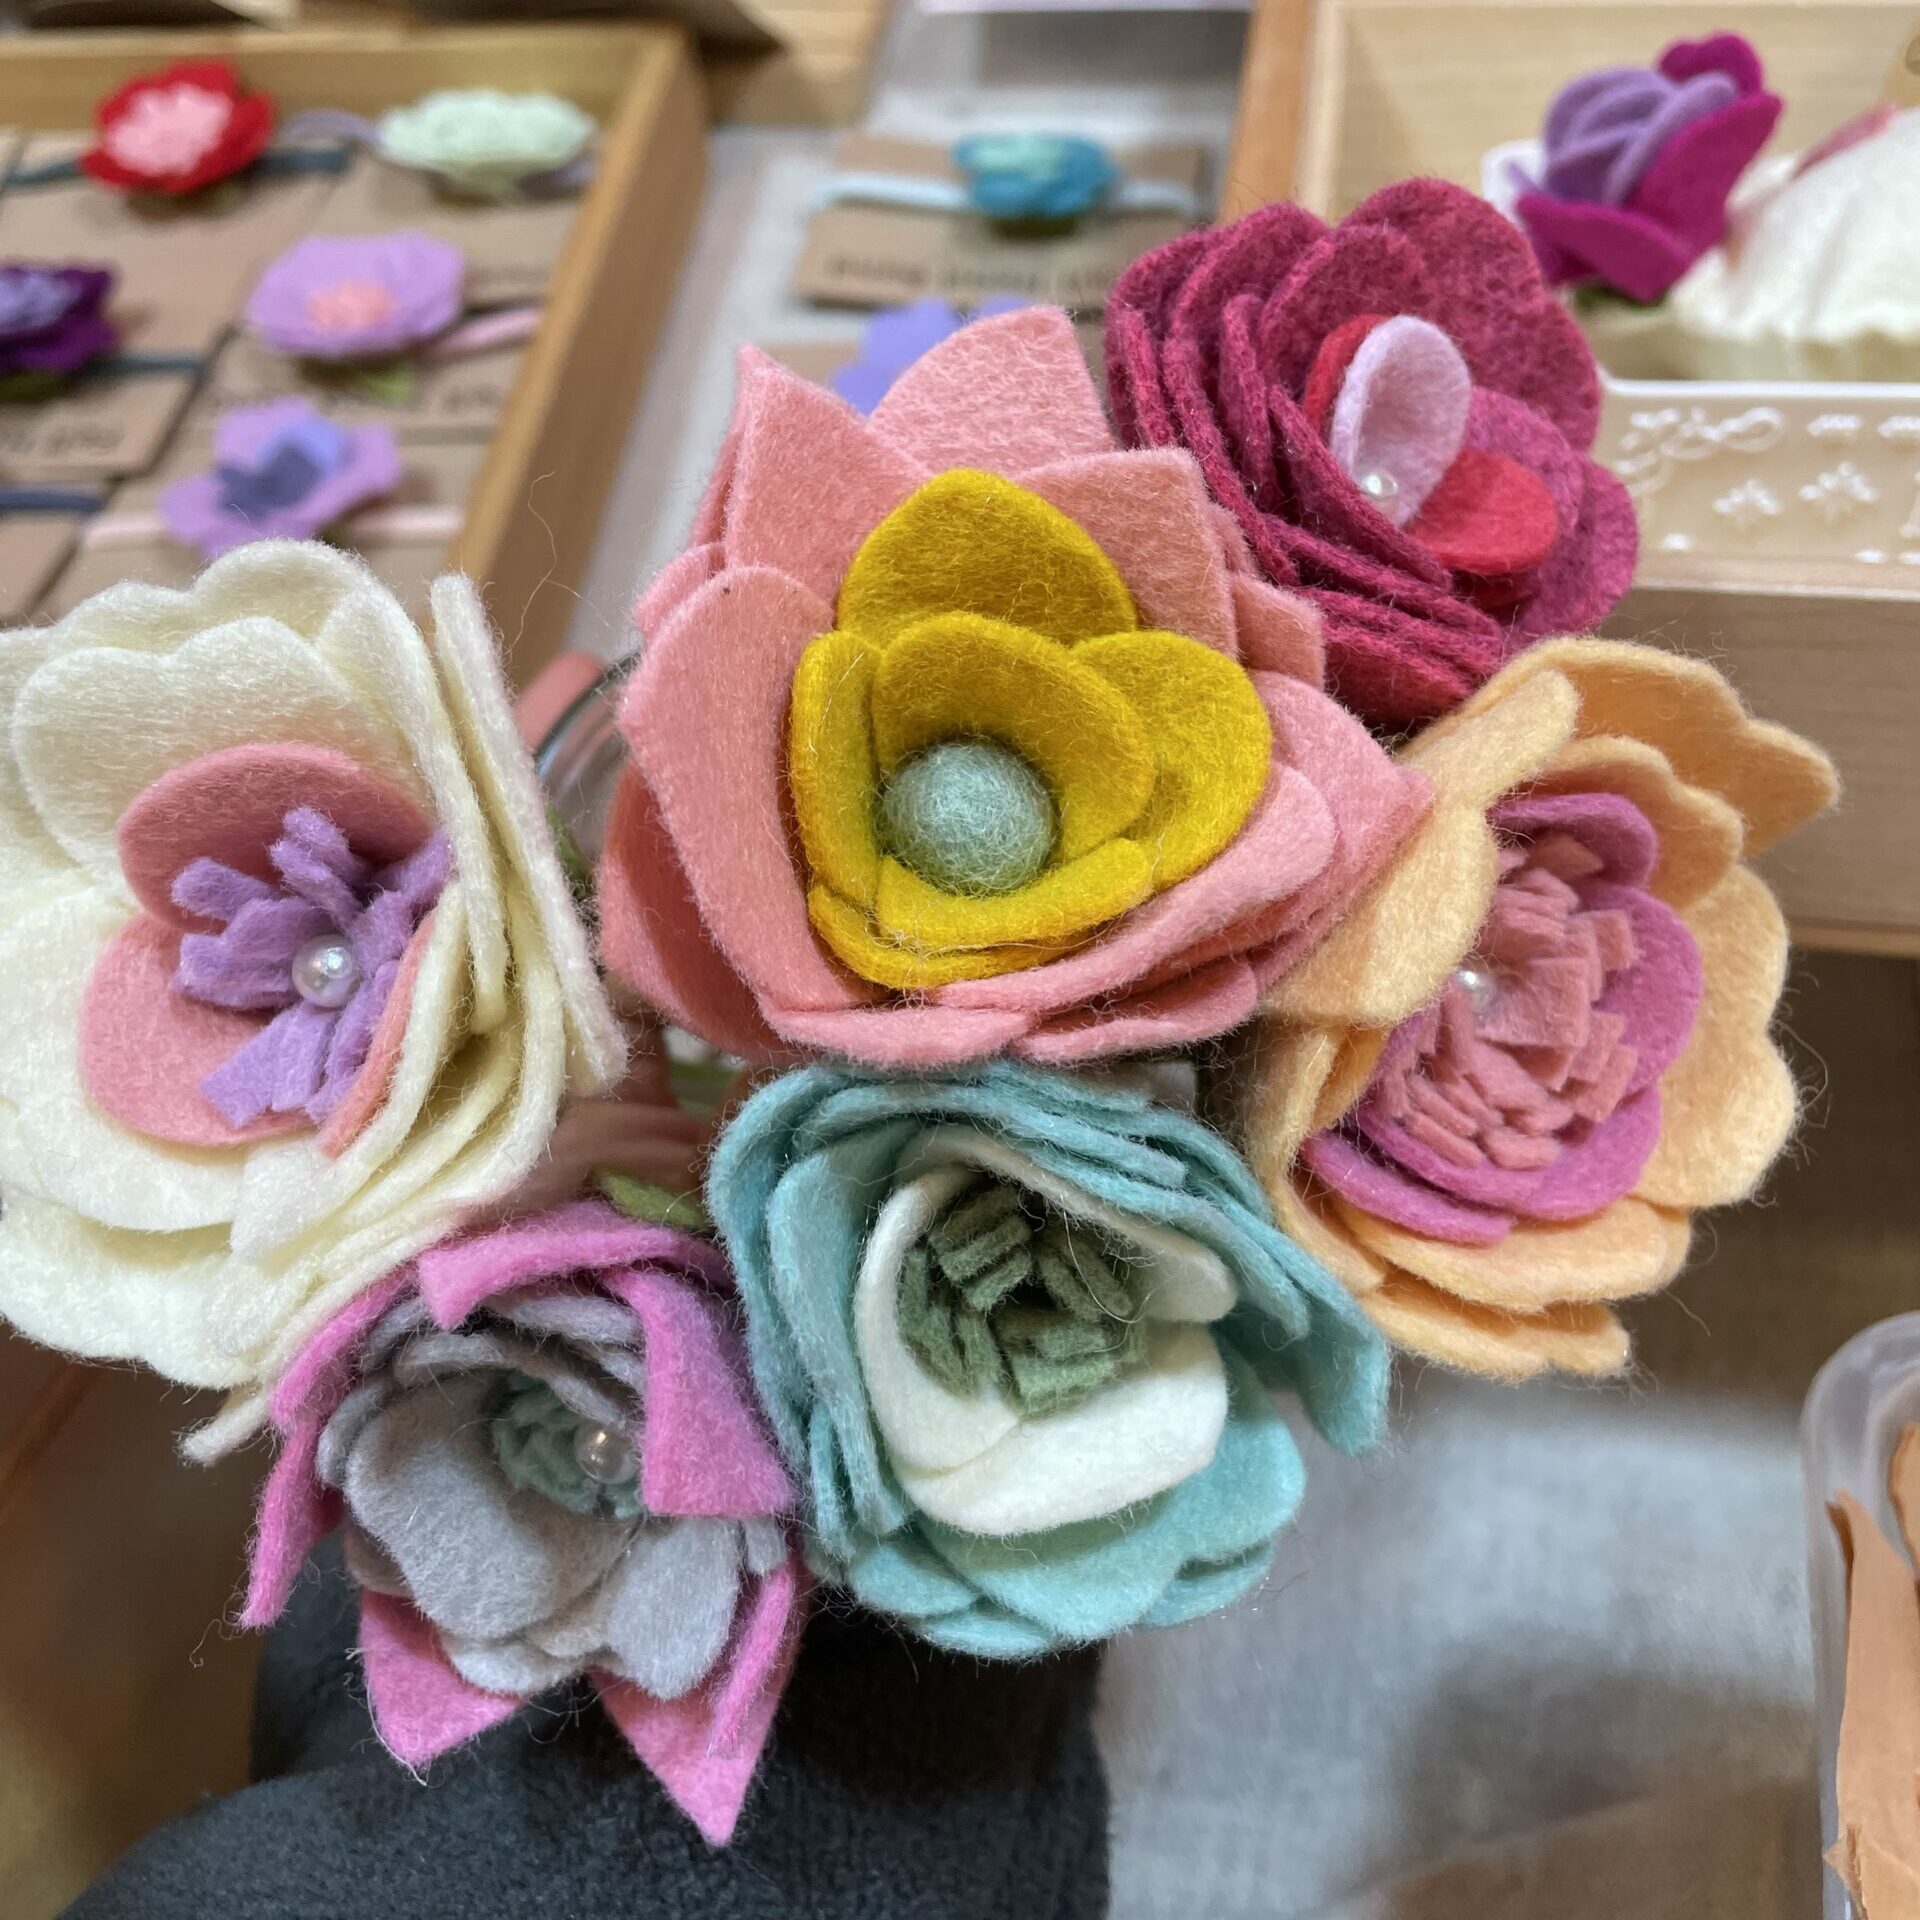 a felt flower bouquet from catshy crafts a vendor in pike place market